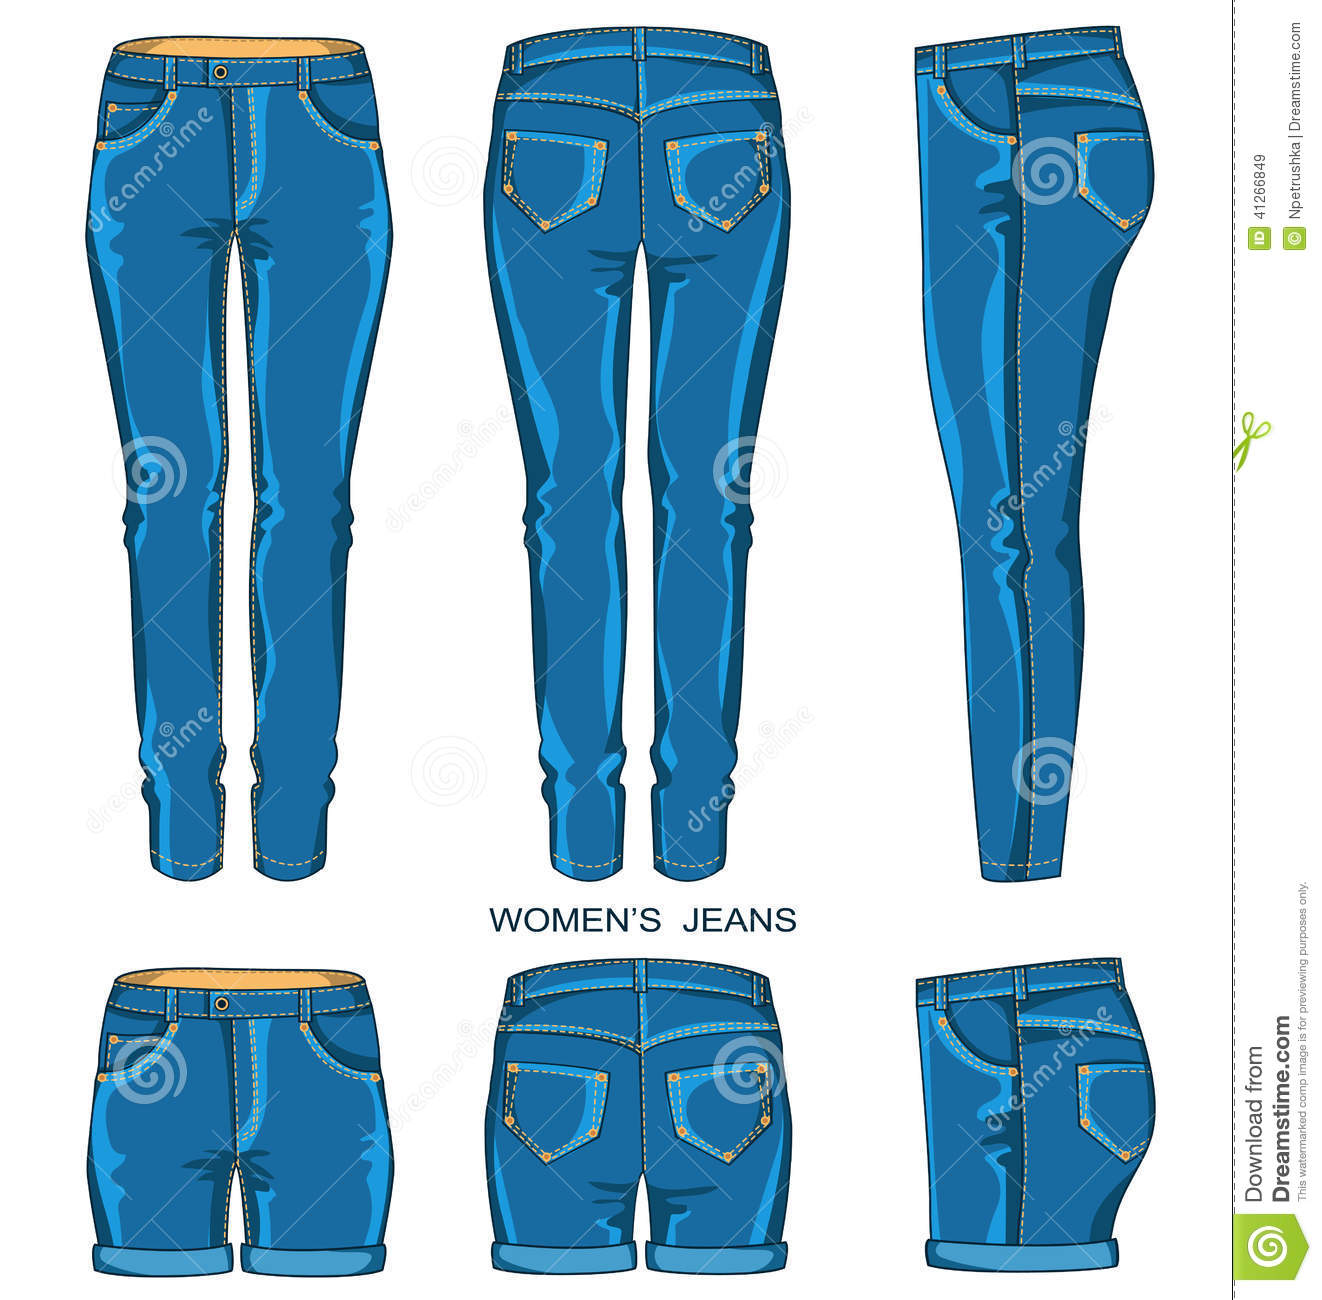 Women Jeans Pants And Shorts Isolated For Design Vector Fashion